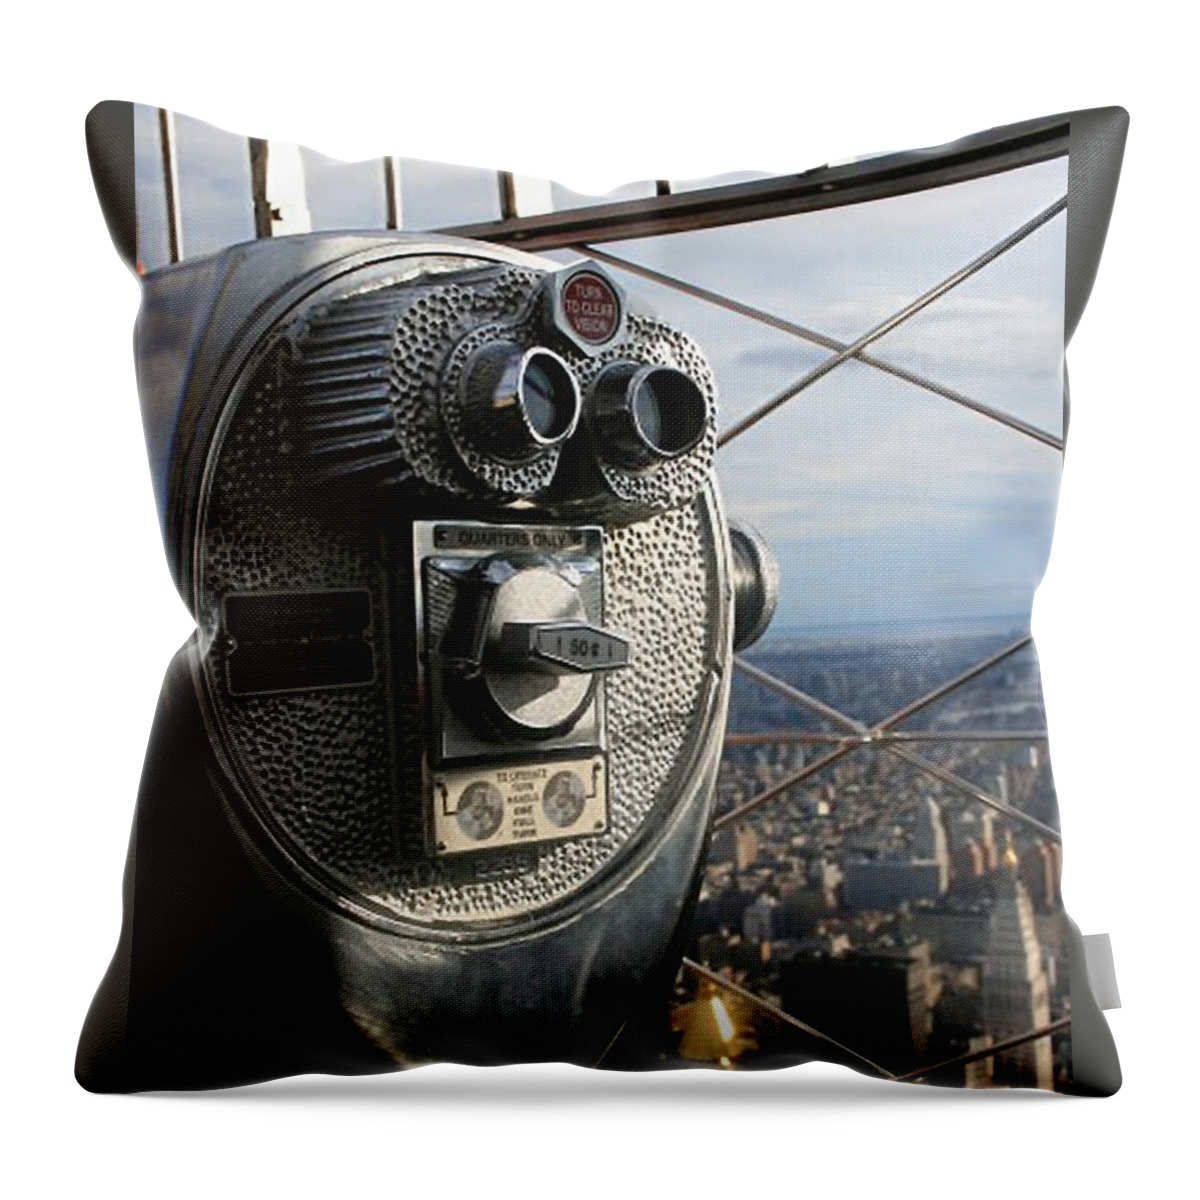 Coin Operated Viewer Throw Pillow featuring the photograph Coin Operated Viewer by Debbie Cundy